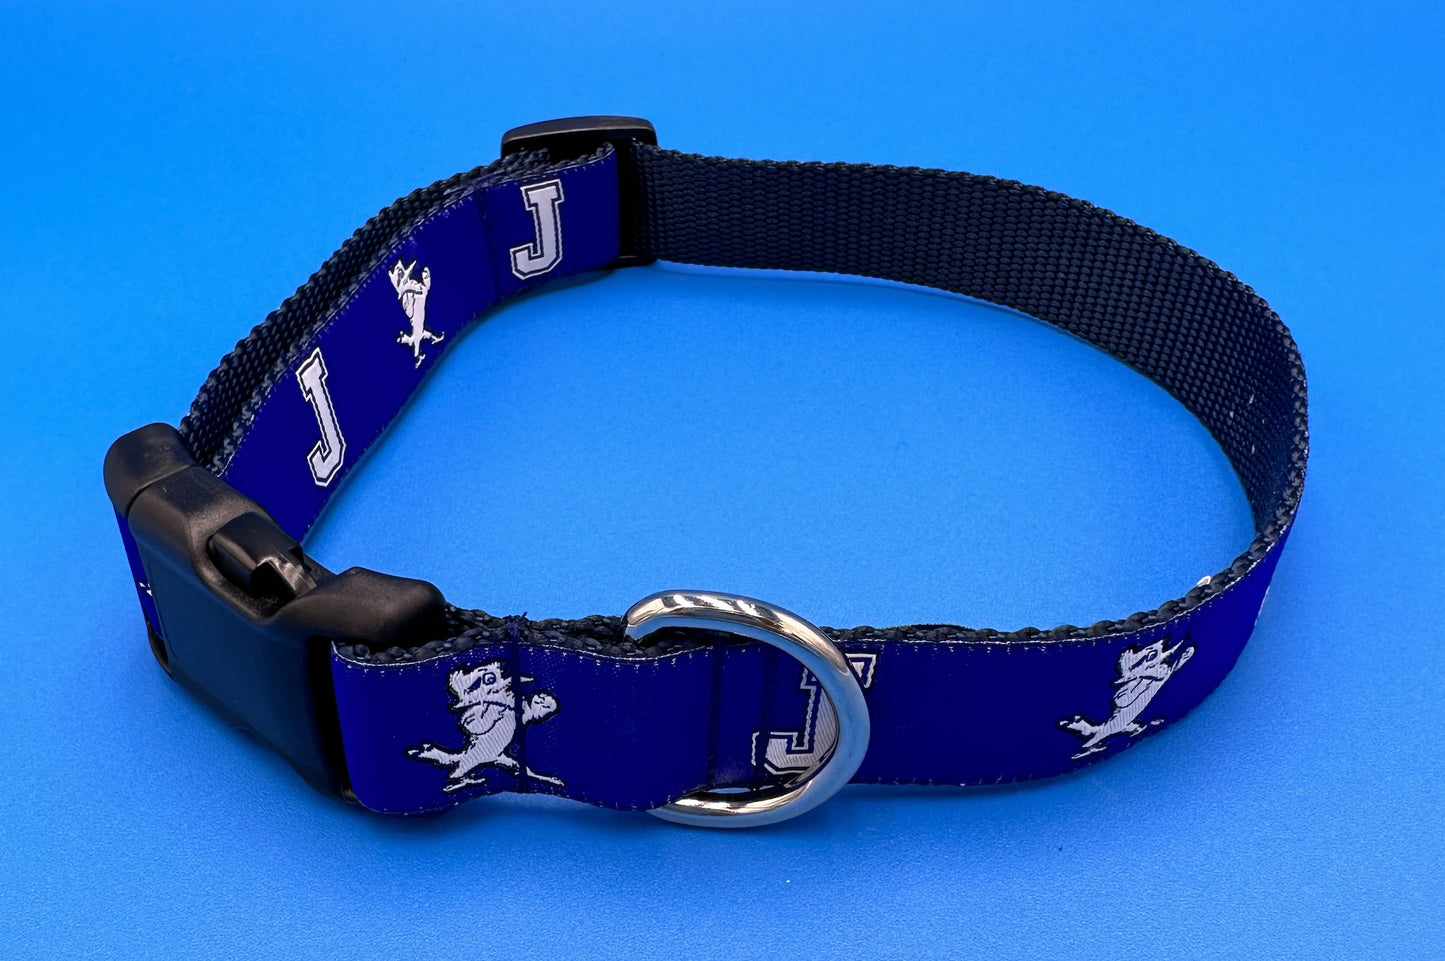 NOLA Couture.  Adjustable Sizes. Woven J w/Jayson Ribbon on durable Nylon Webbing.  Silver Nickel & Plastic Hardware for attaching leash.  Small fits 9"-15". Medium fits 10" to 17". Large fits 12 to 21"